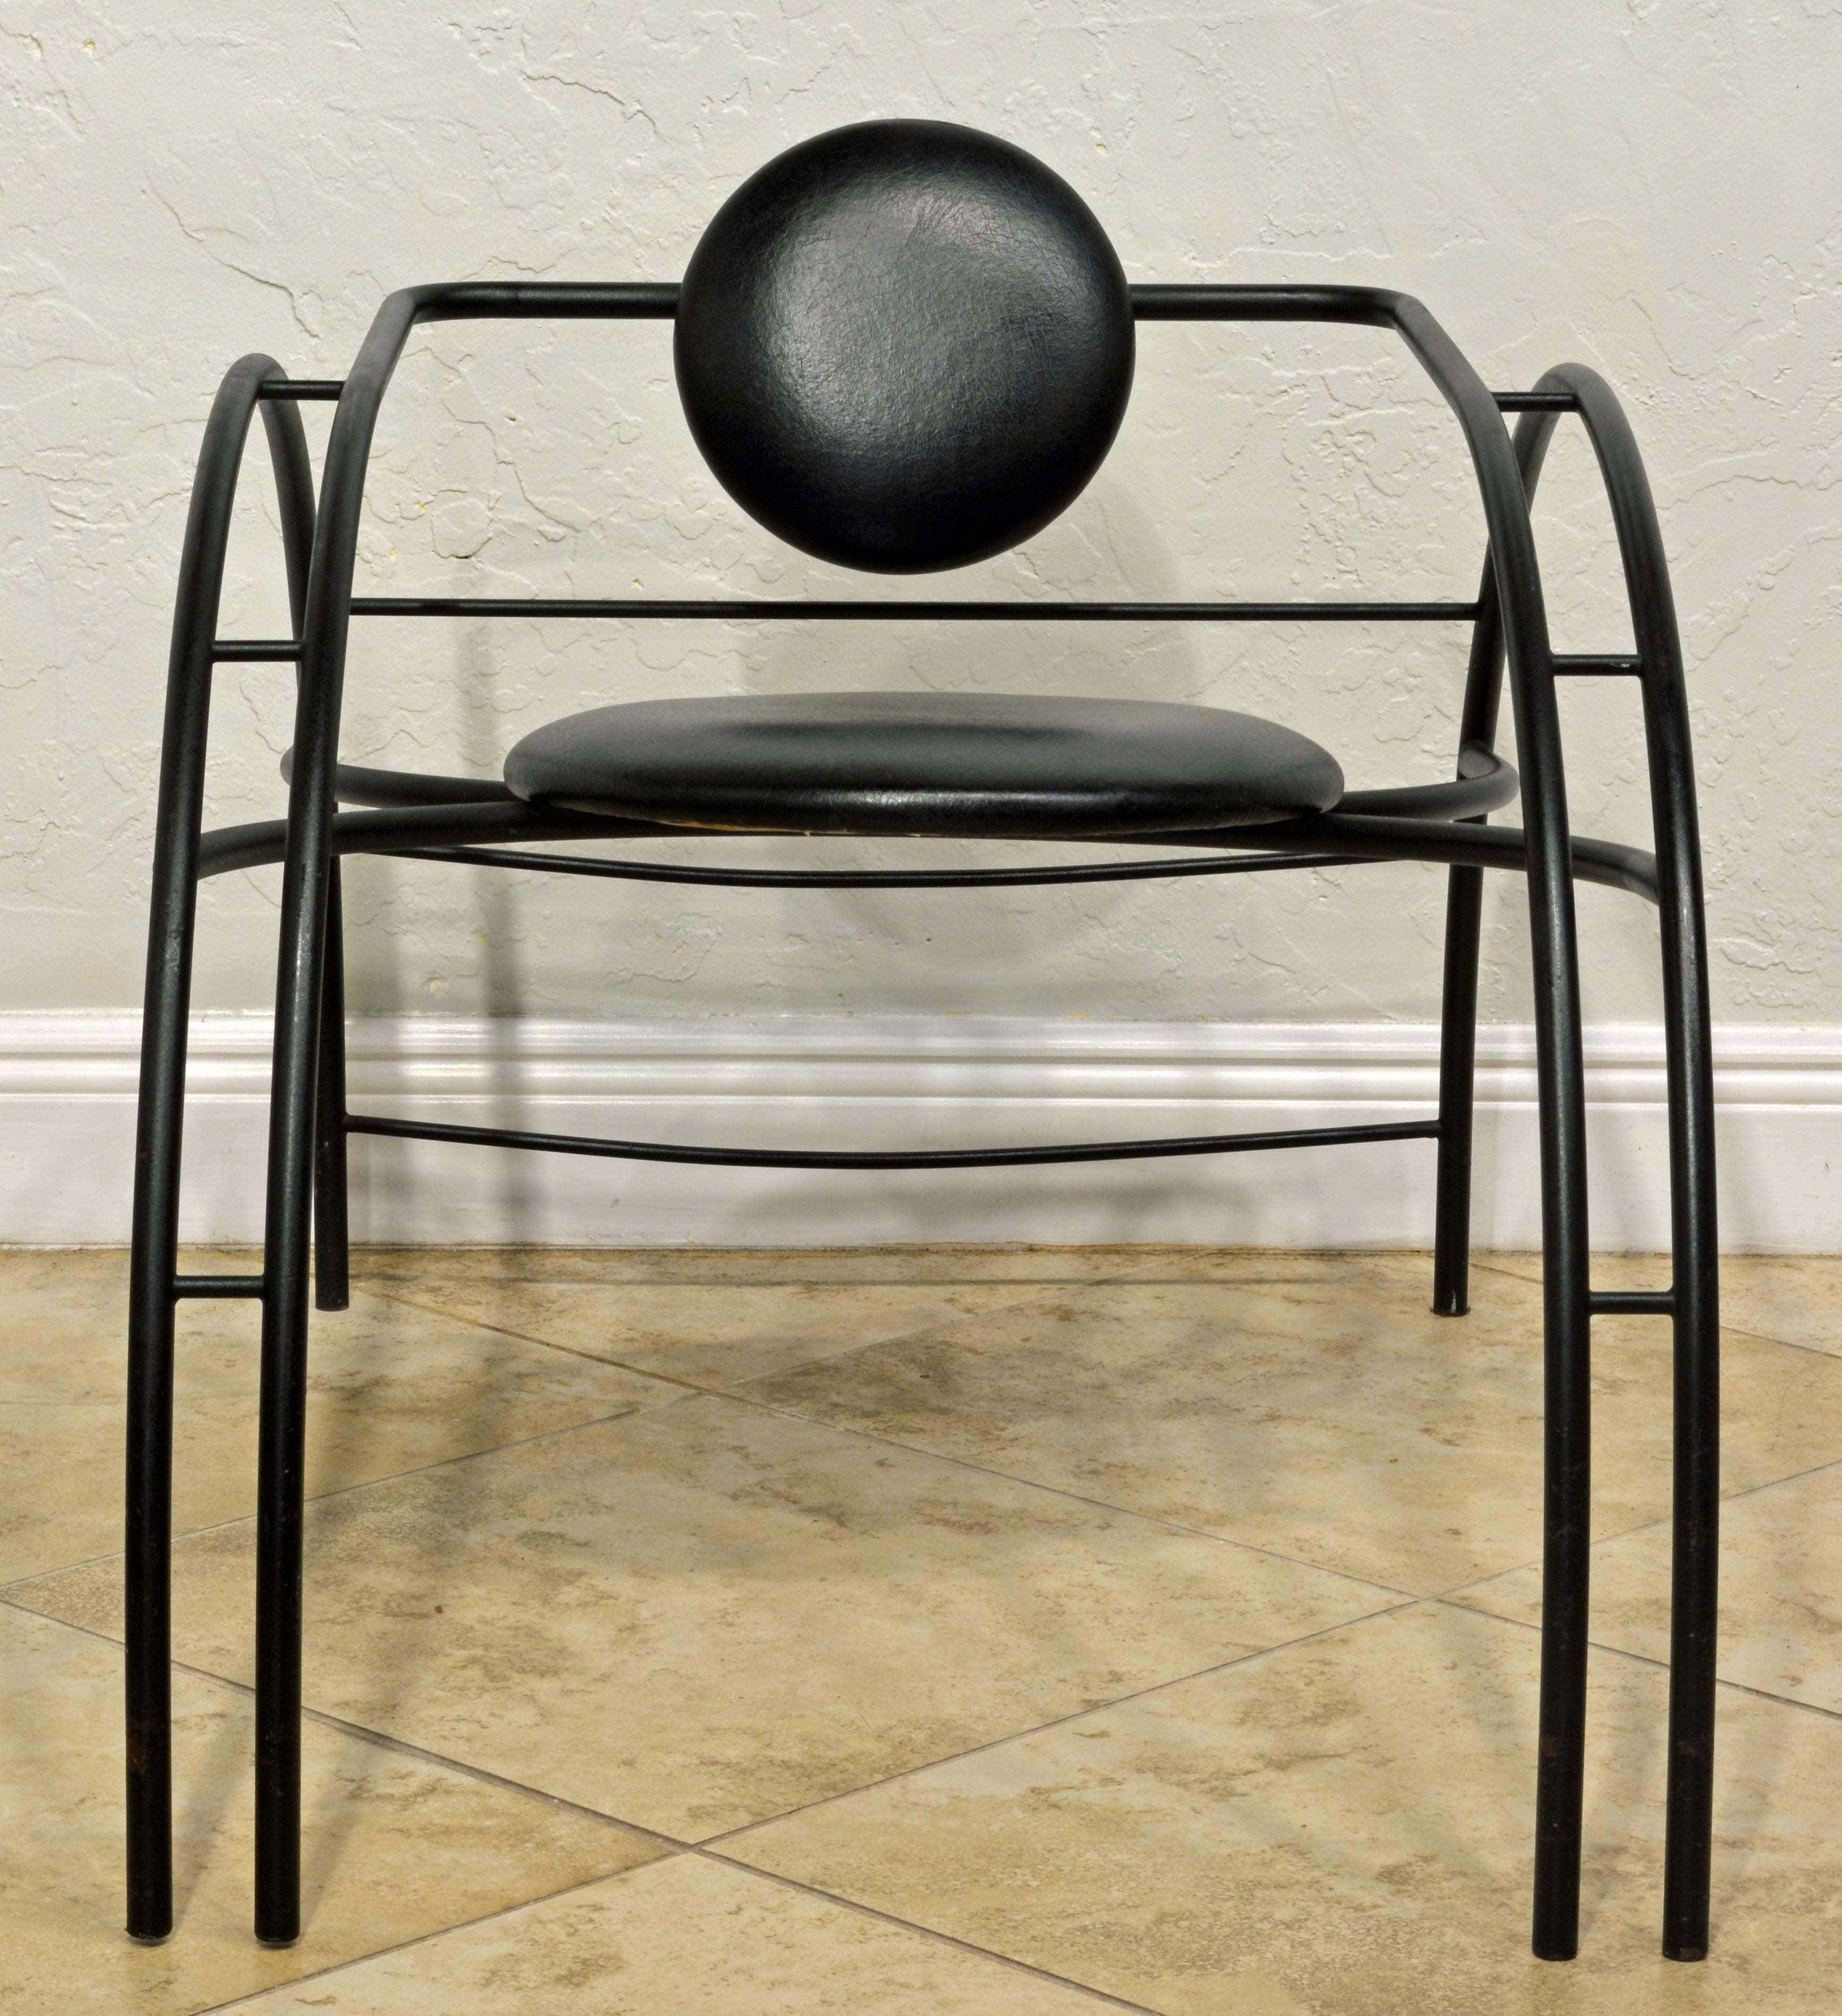 This iconic Postmodern Memphis style lounge chair by the Canadian Design Group Les Amisca is not often offered on the market. It is an abstract composition of the tubular steel framework with lines accented by the circular seat and backrest. It is